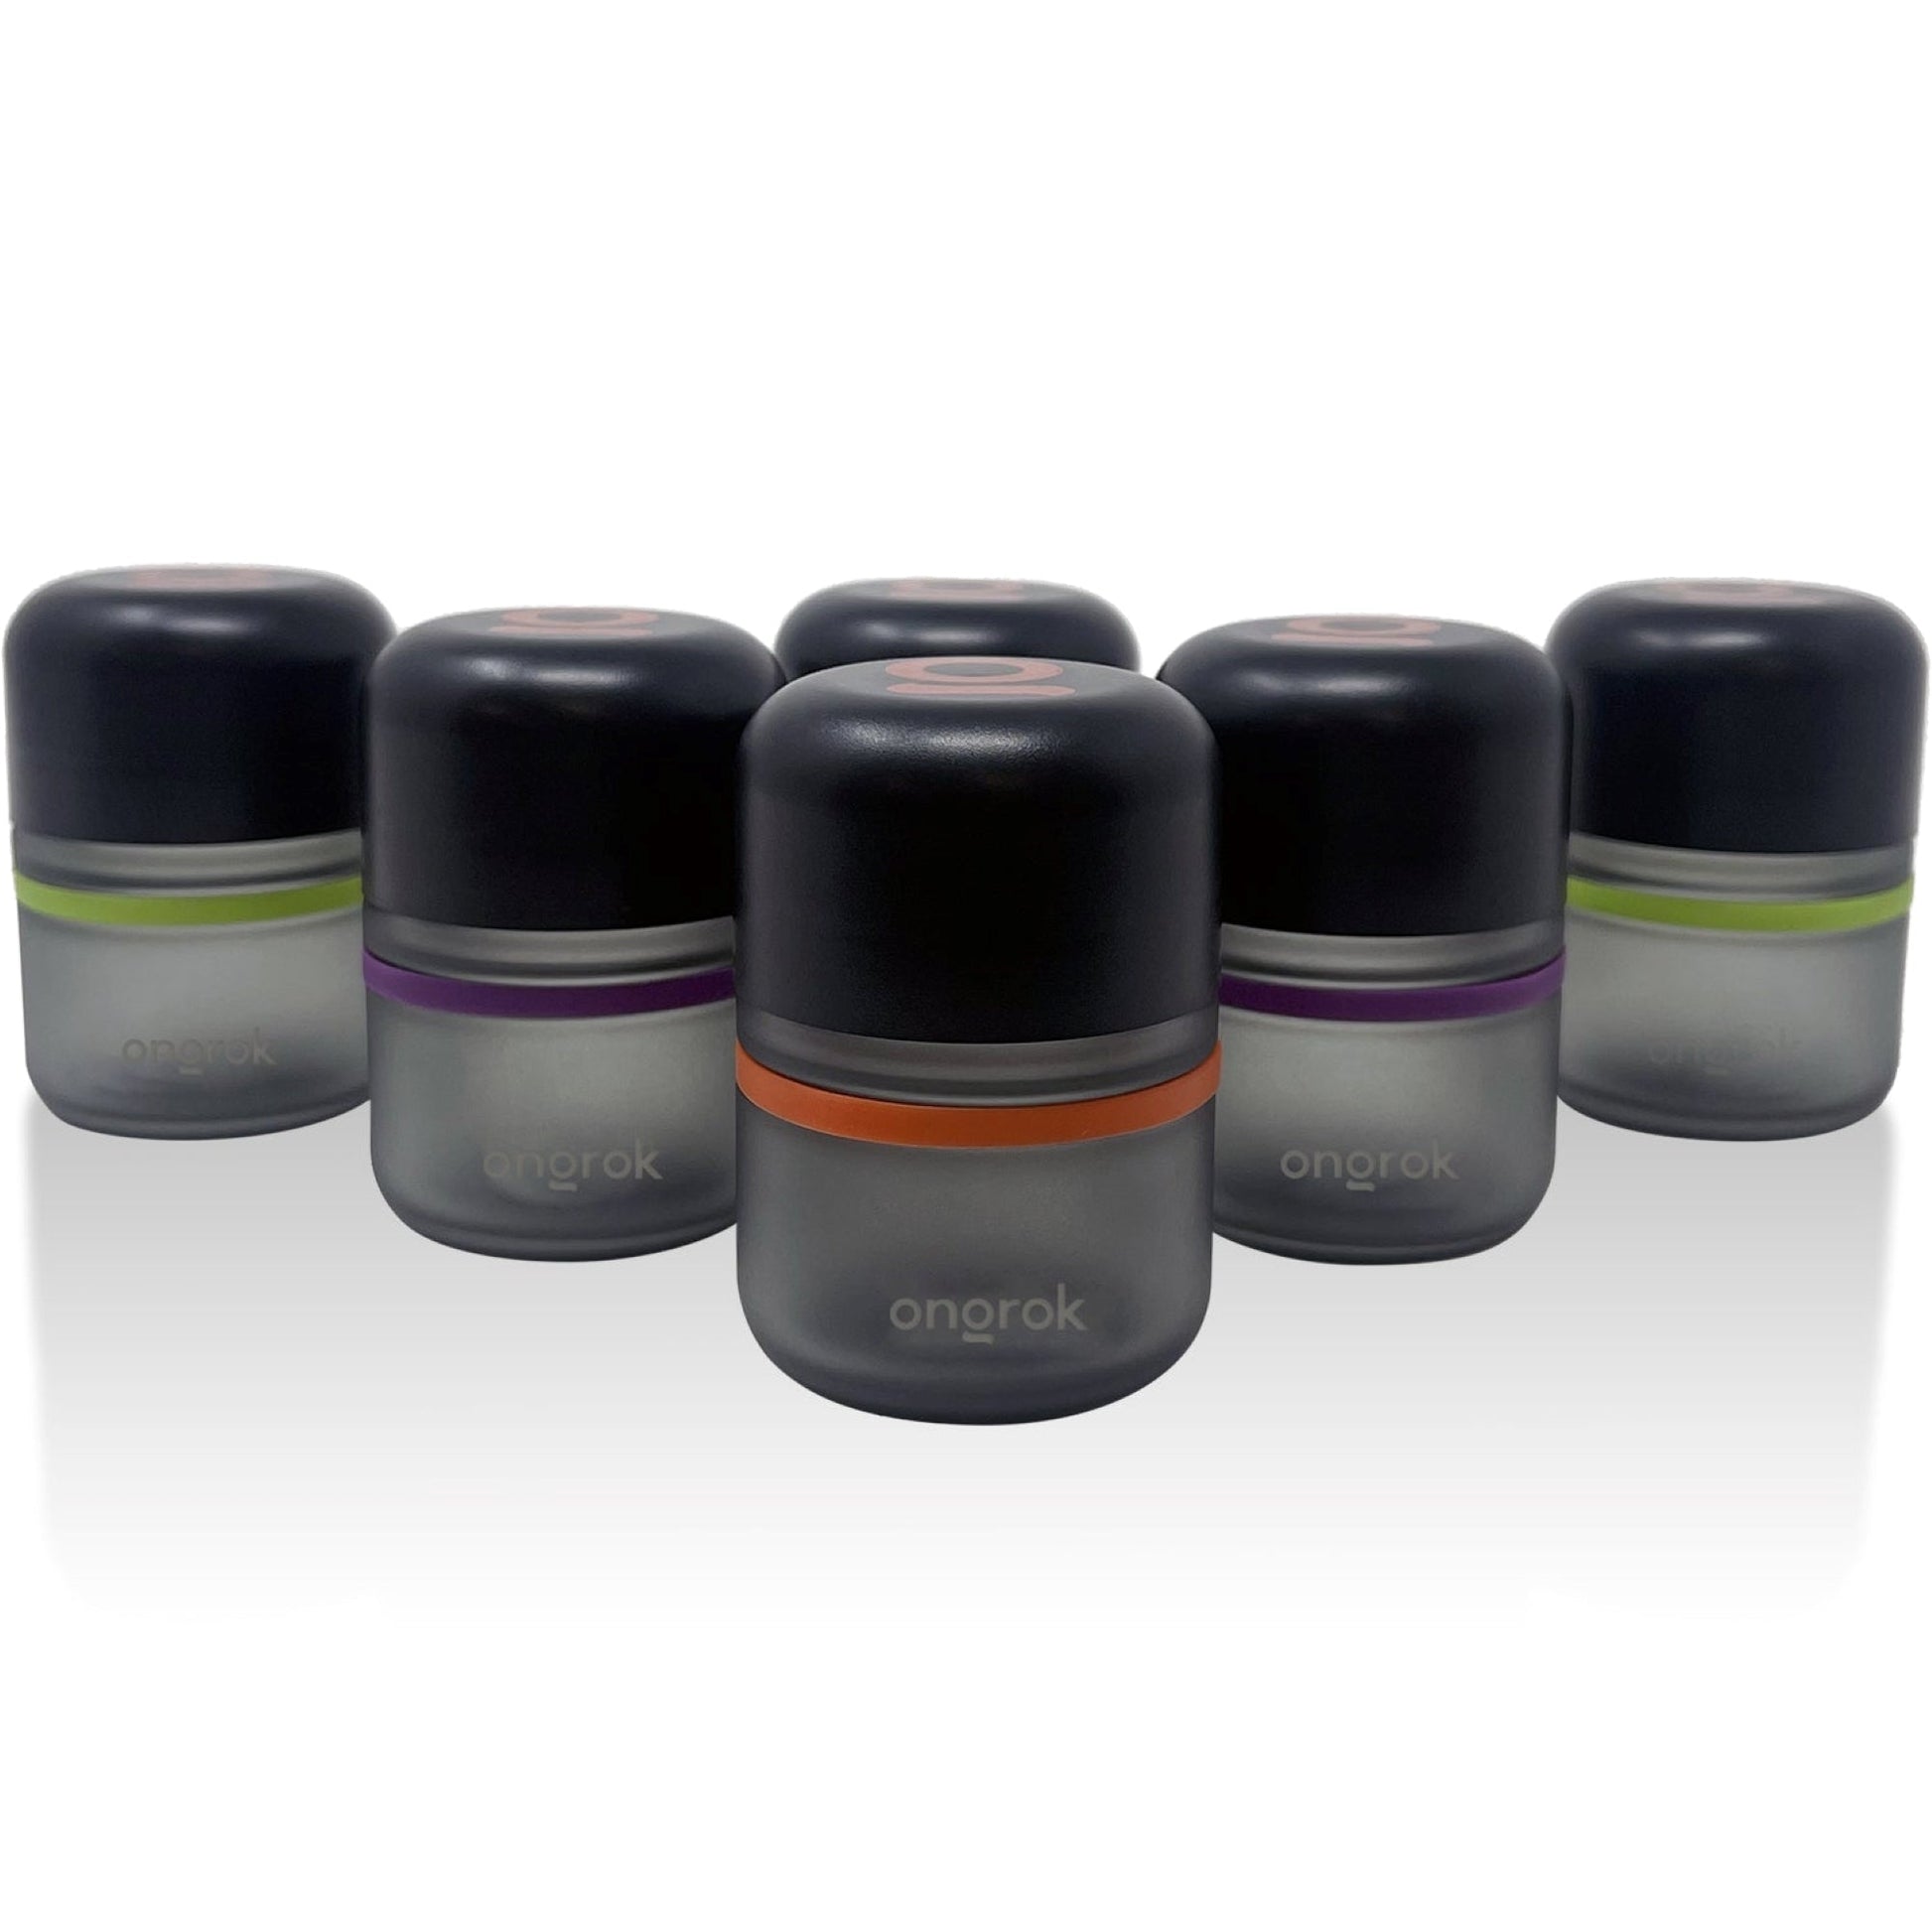 Ongrok Glass Storage Jars by Ongrok | Mission Dispensary